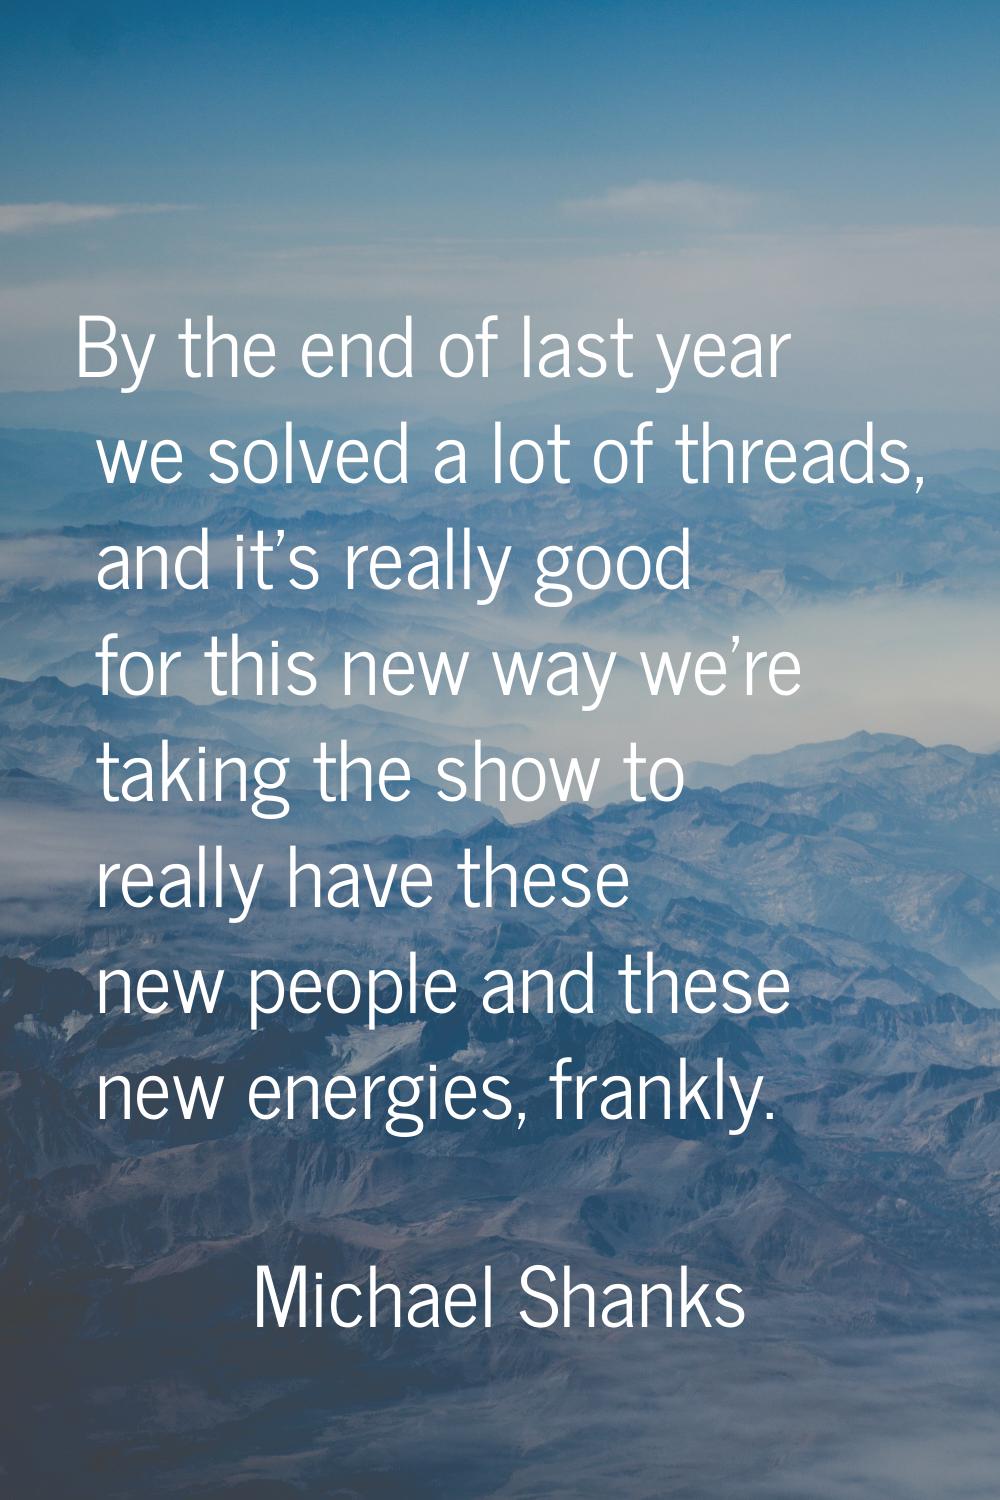 By the end of last year we solved a lot of threads, and it's really good for this new way we're tak